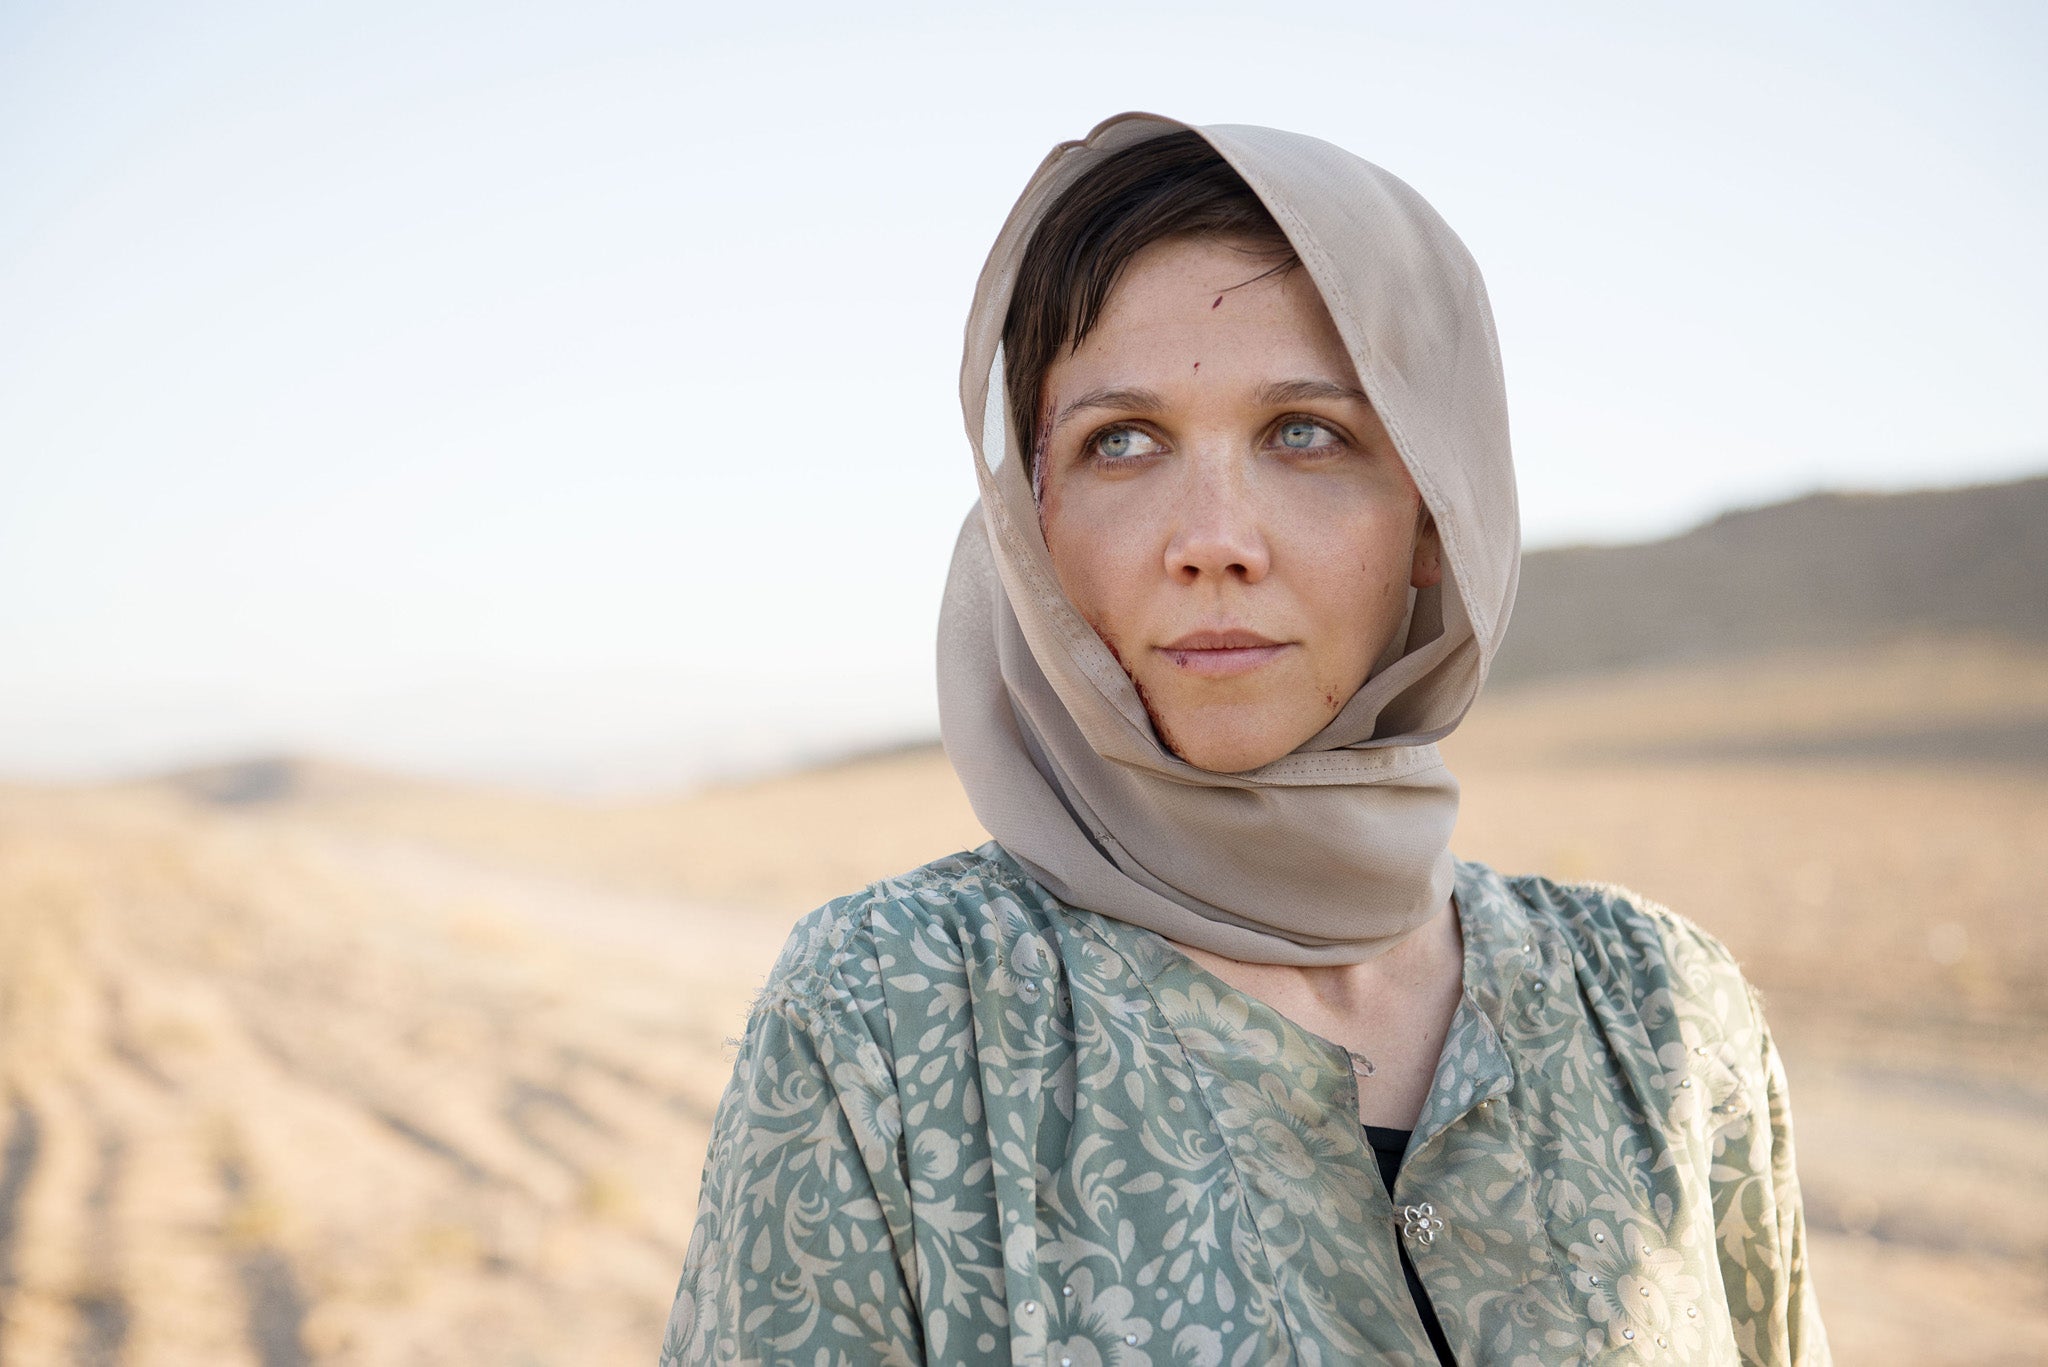 Maggie Gyllenhaal stars in BBC Two's The Honourable Woman